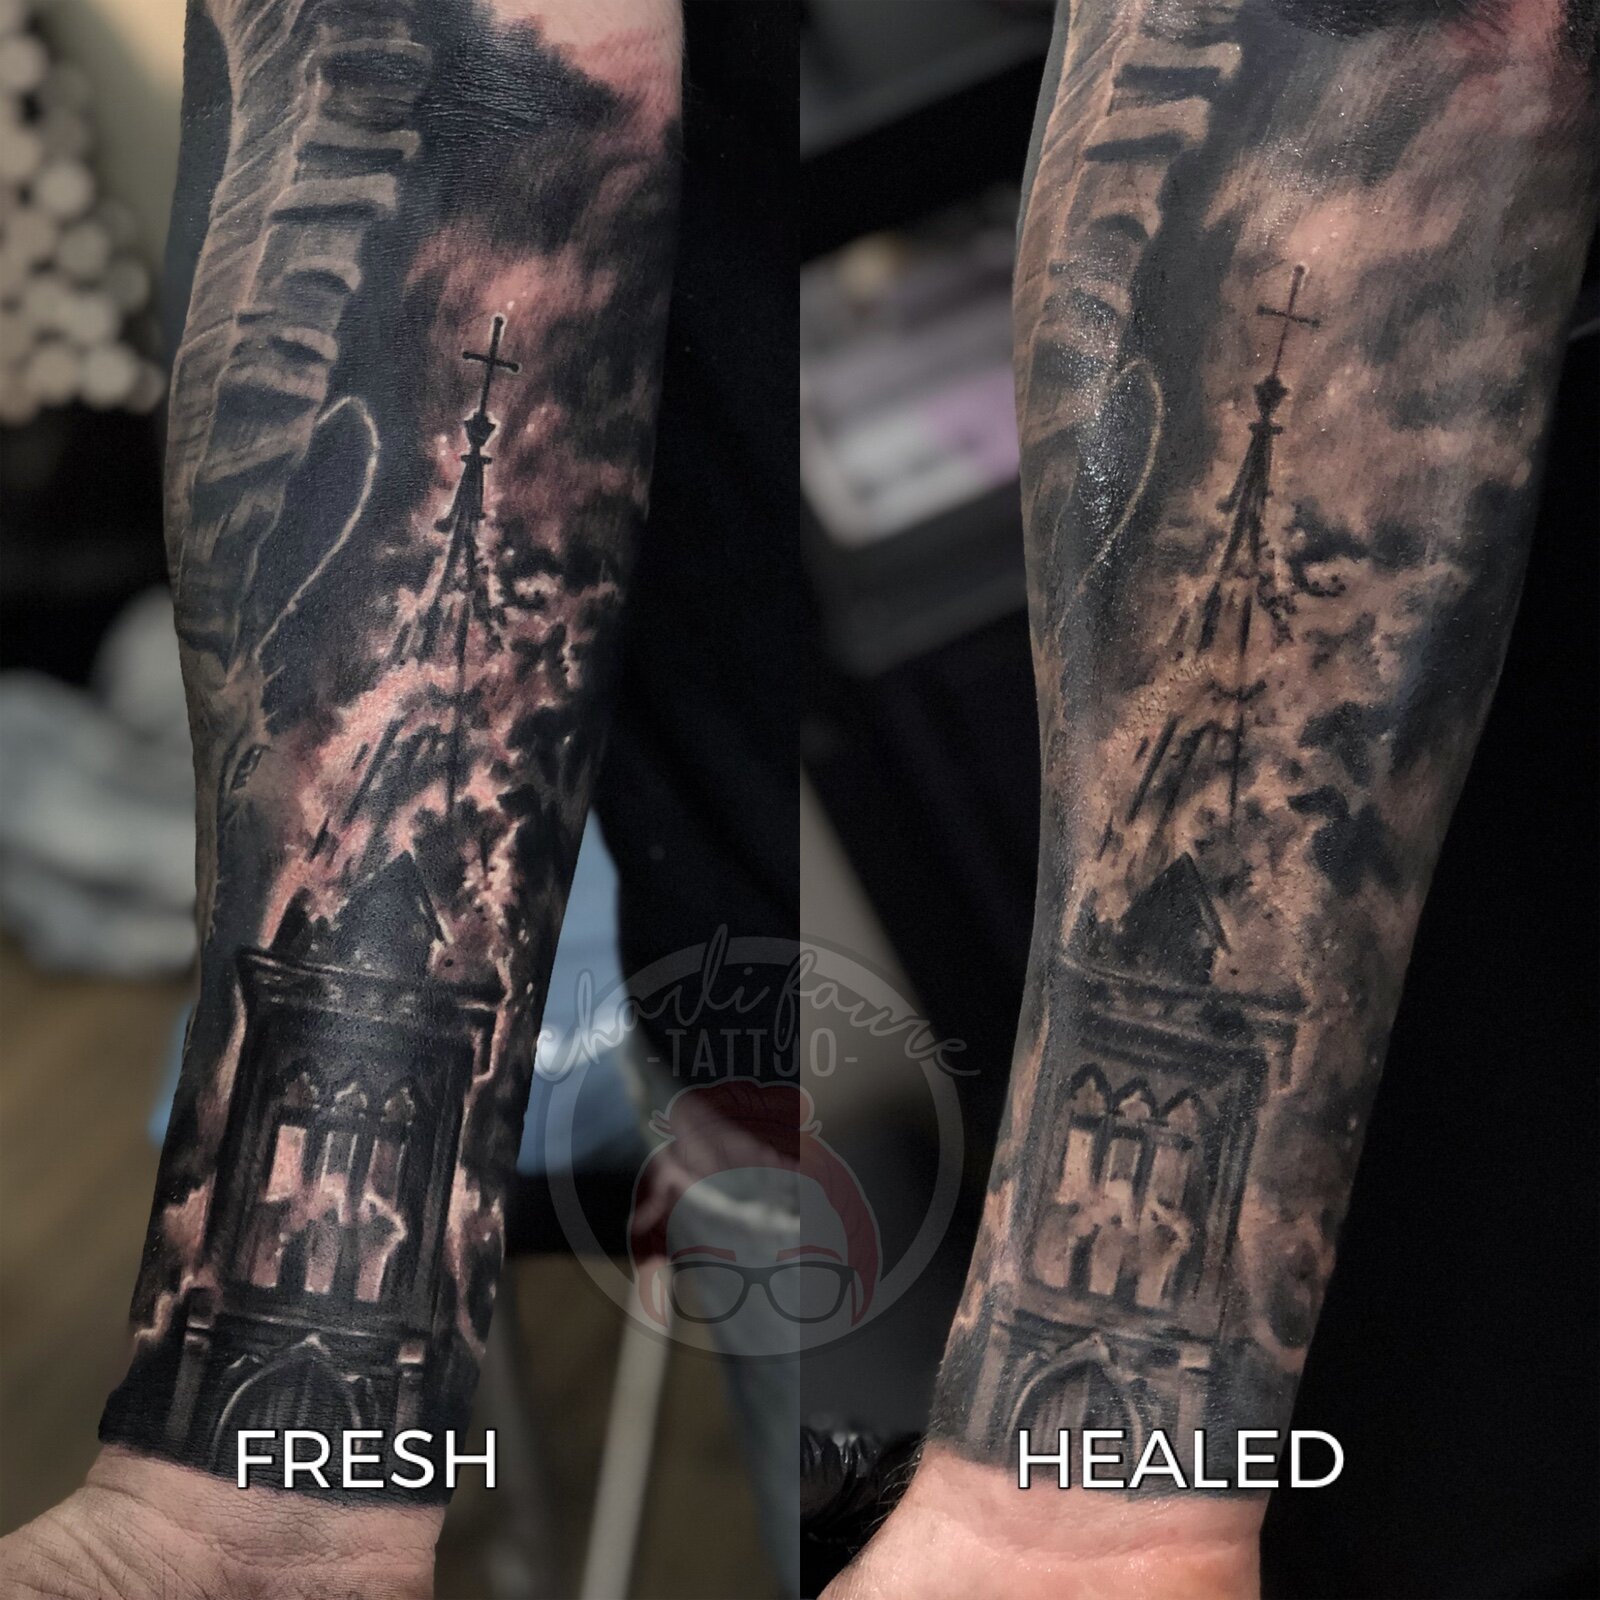 What Do You Do if Your Tattoo Is Peeling Useful Tips from a Professional